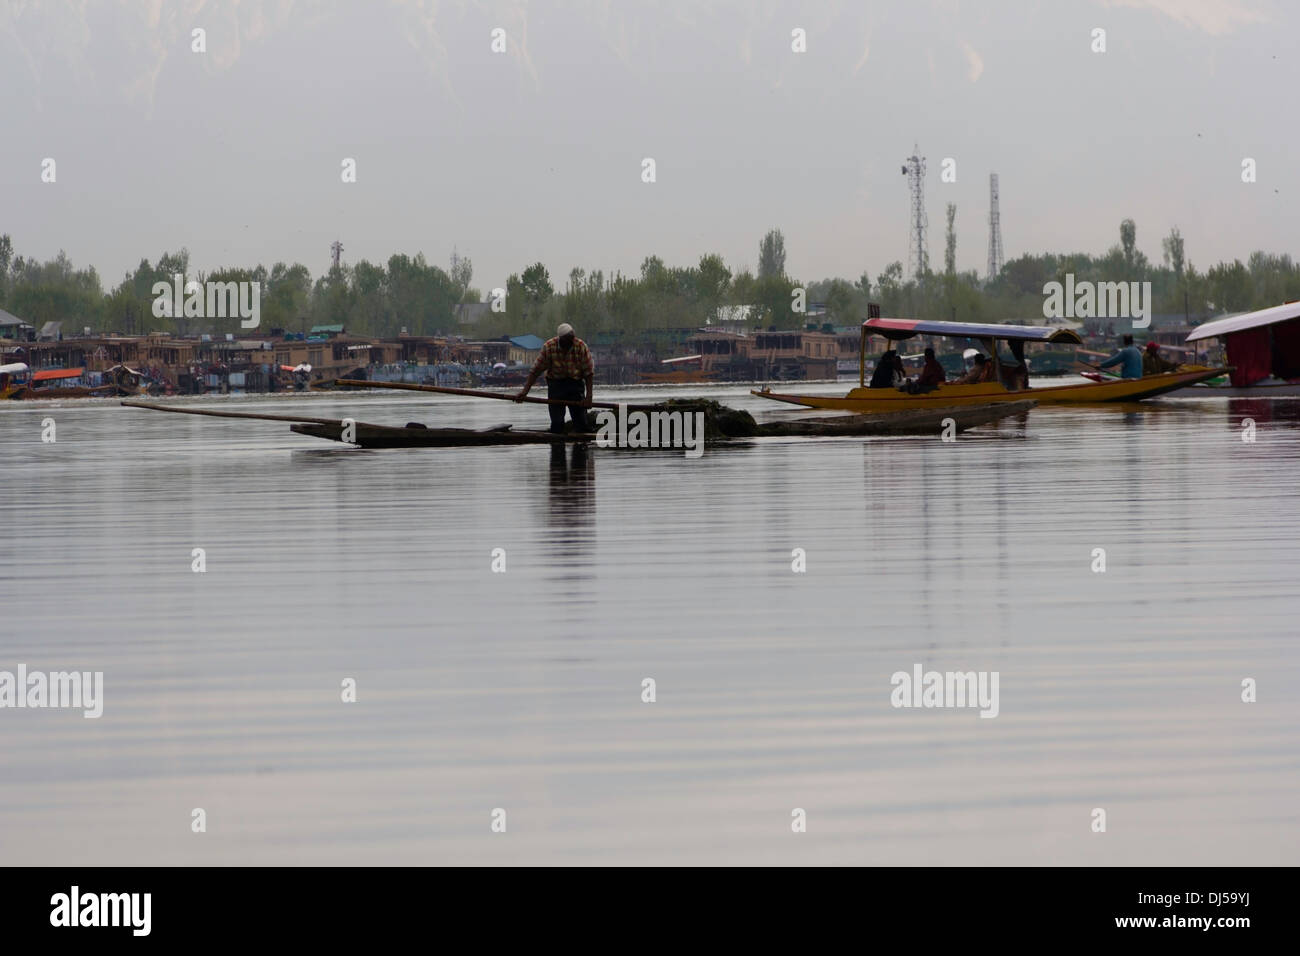 Man removing weeds from bottom of Dal Lake, Srinagar & boat laden with weeds that have been removed, required for health of lake Stock Photo